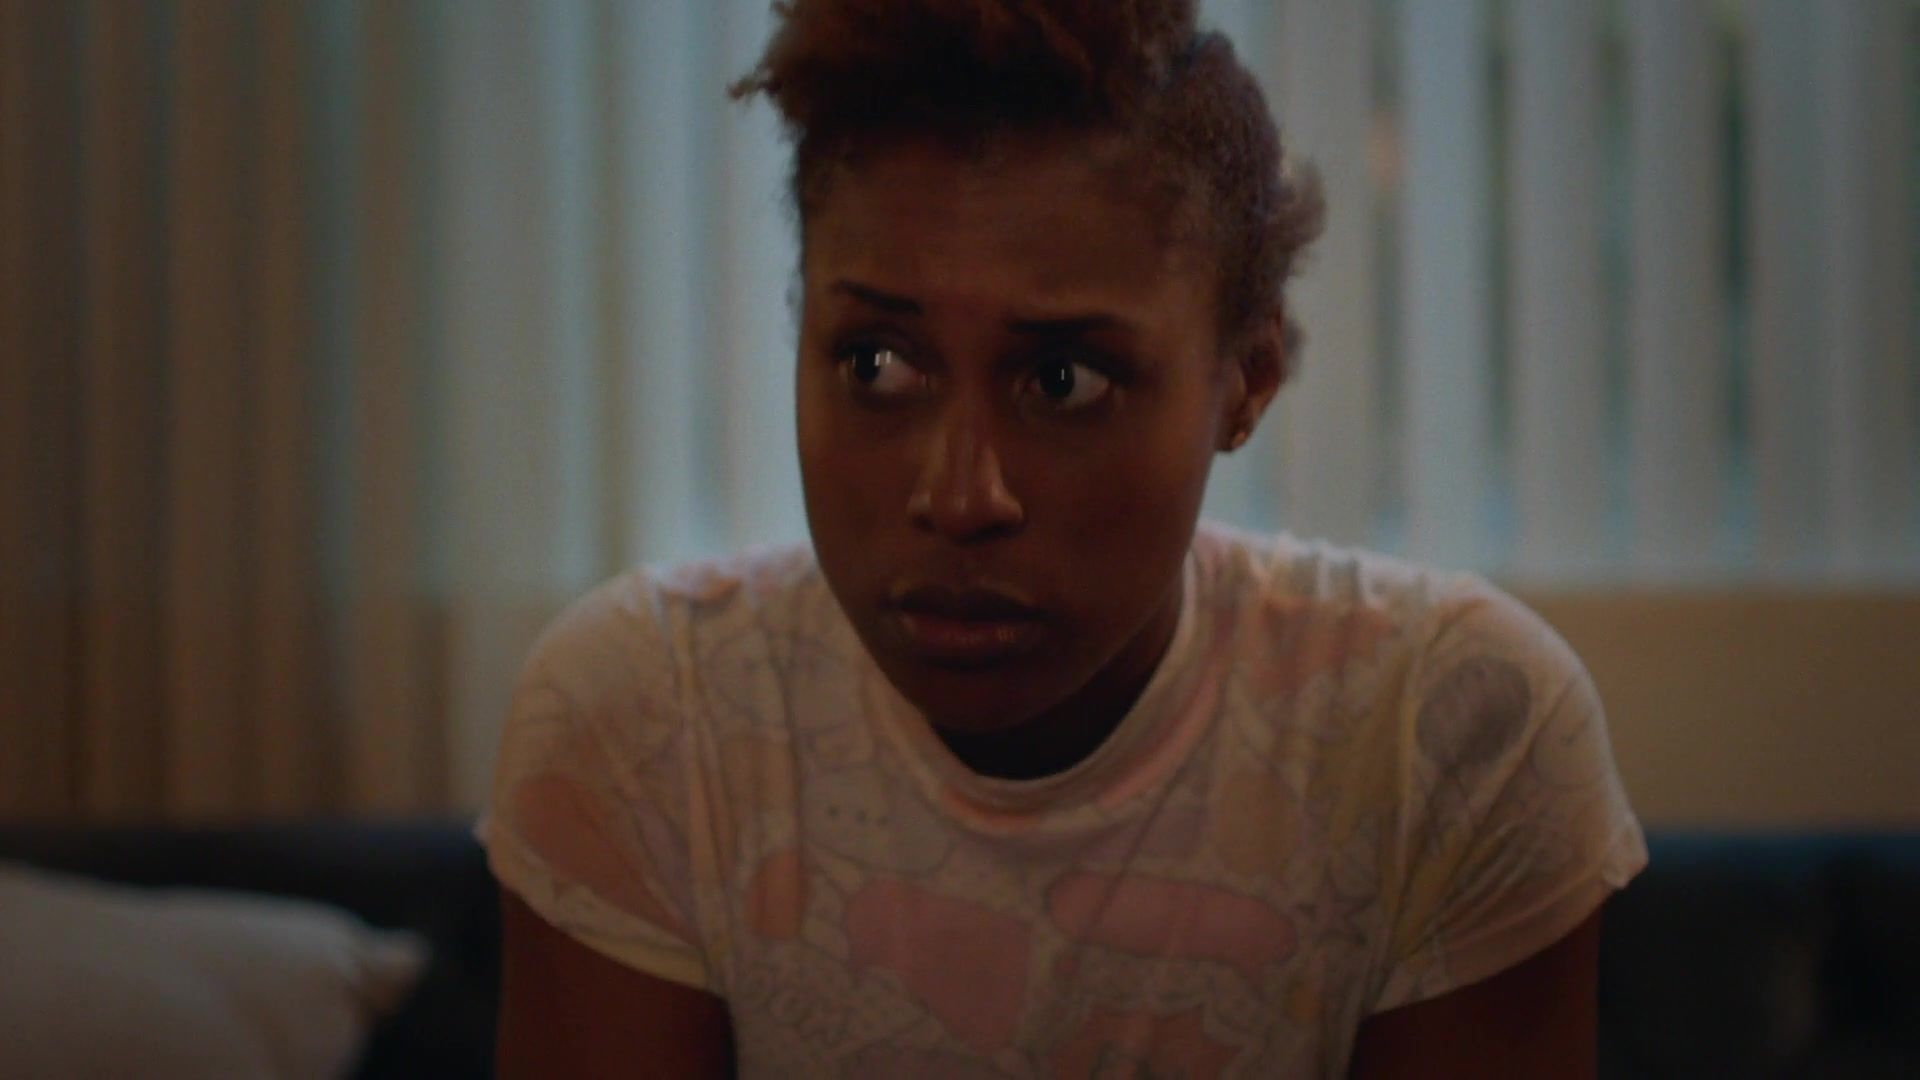 X-Angels Domnique Perry naked, Issa Rae Naked - Insecure s02e01 (2017) Tight Pussy Fucked - 1